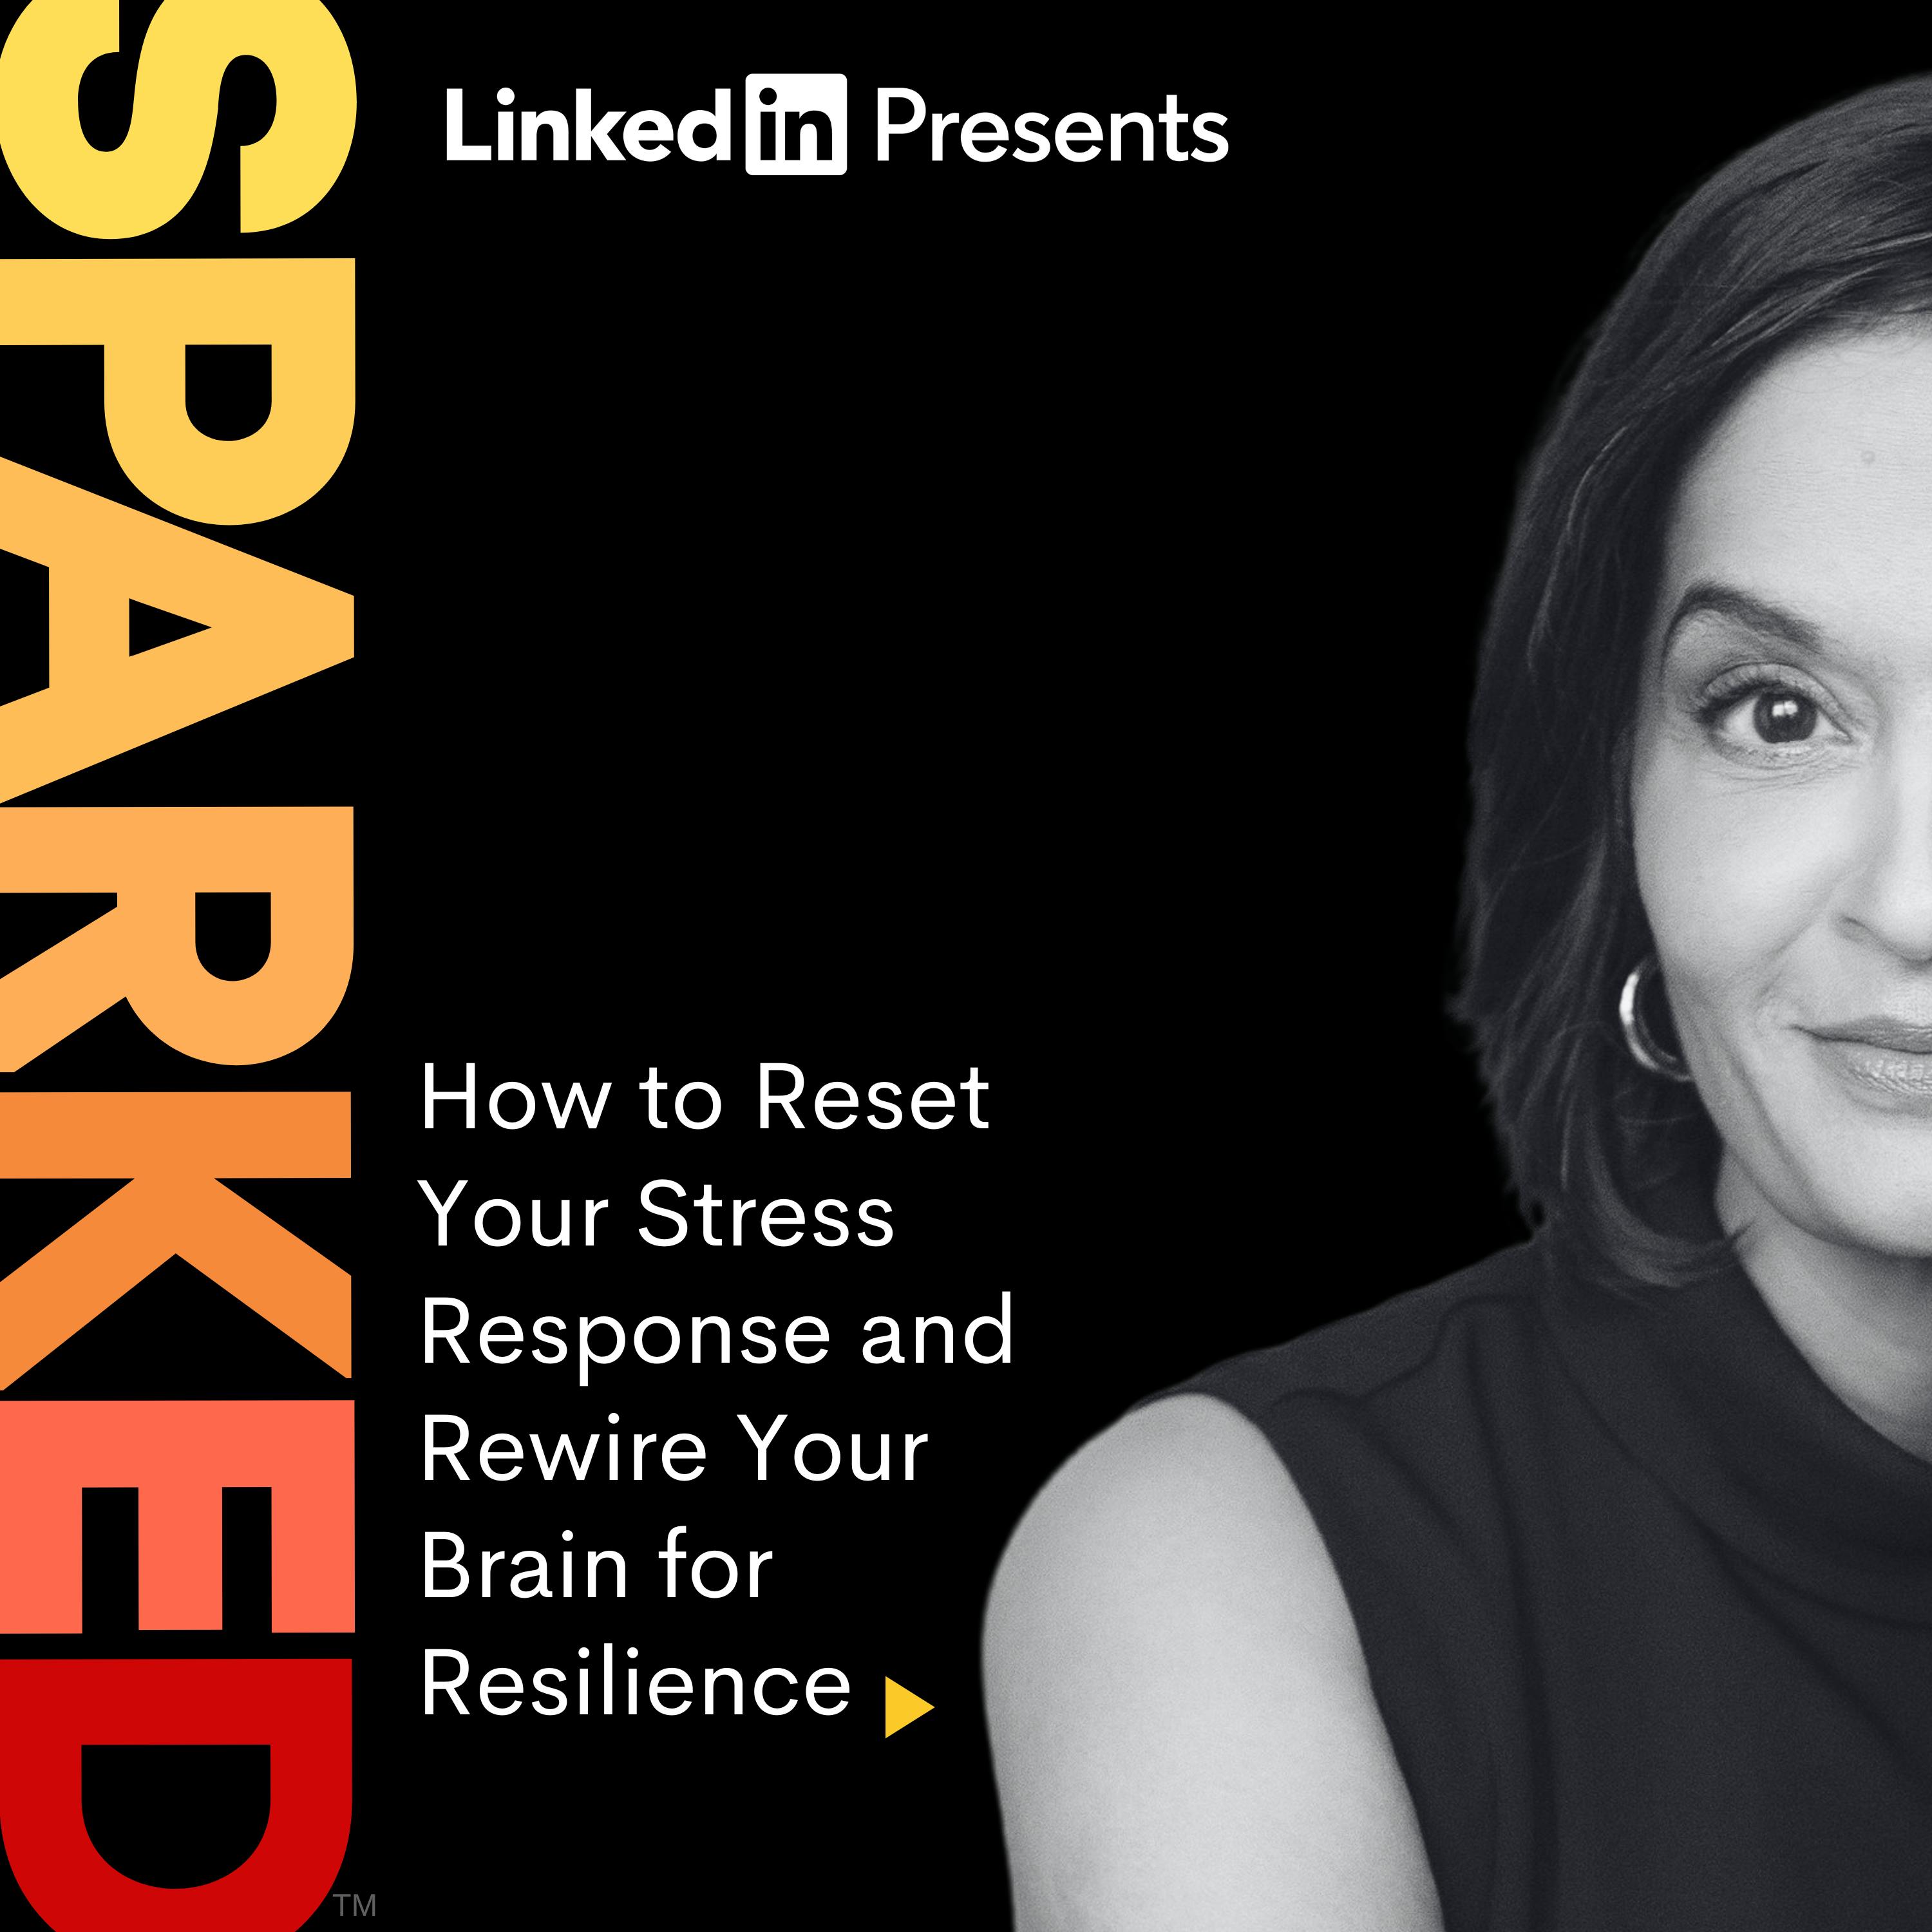 How to Reset Your Stress Response and Rewire Your Brain for Resilience